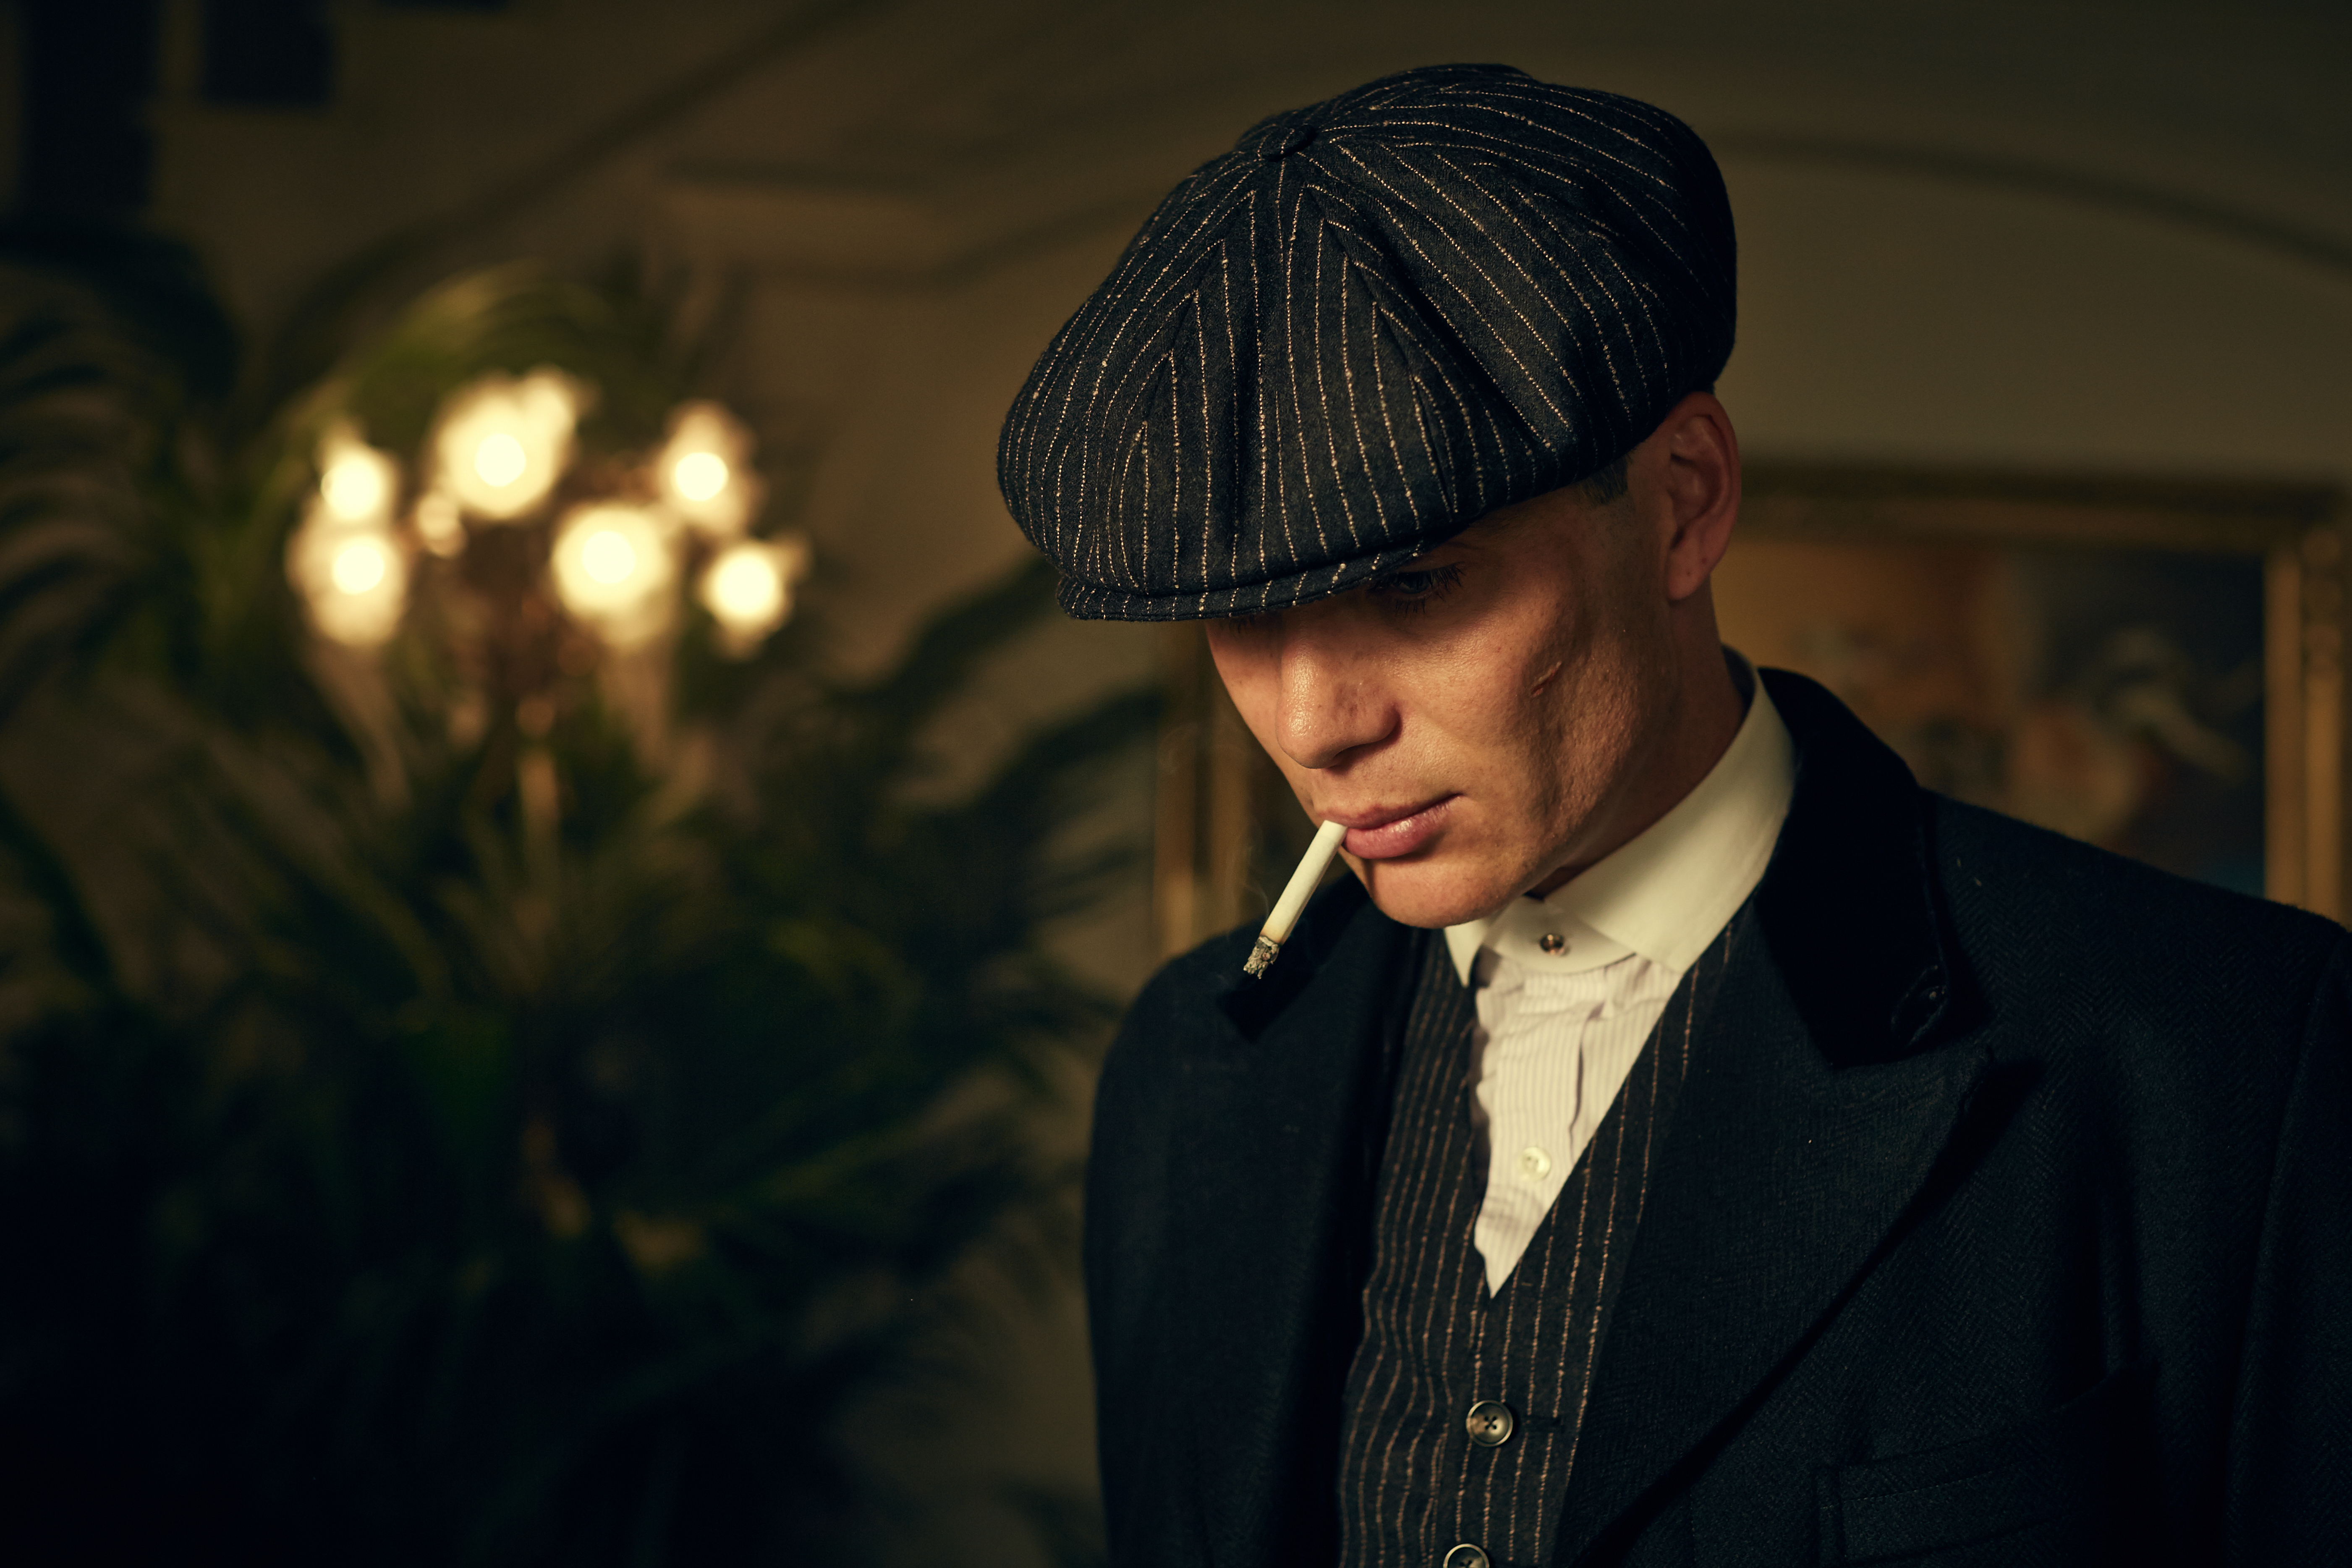 Peaky Blinders wallpaper for desktop, download free Peaky Blinders picture and background for PC